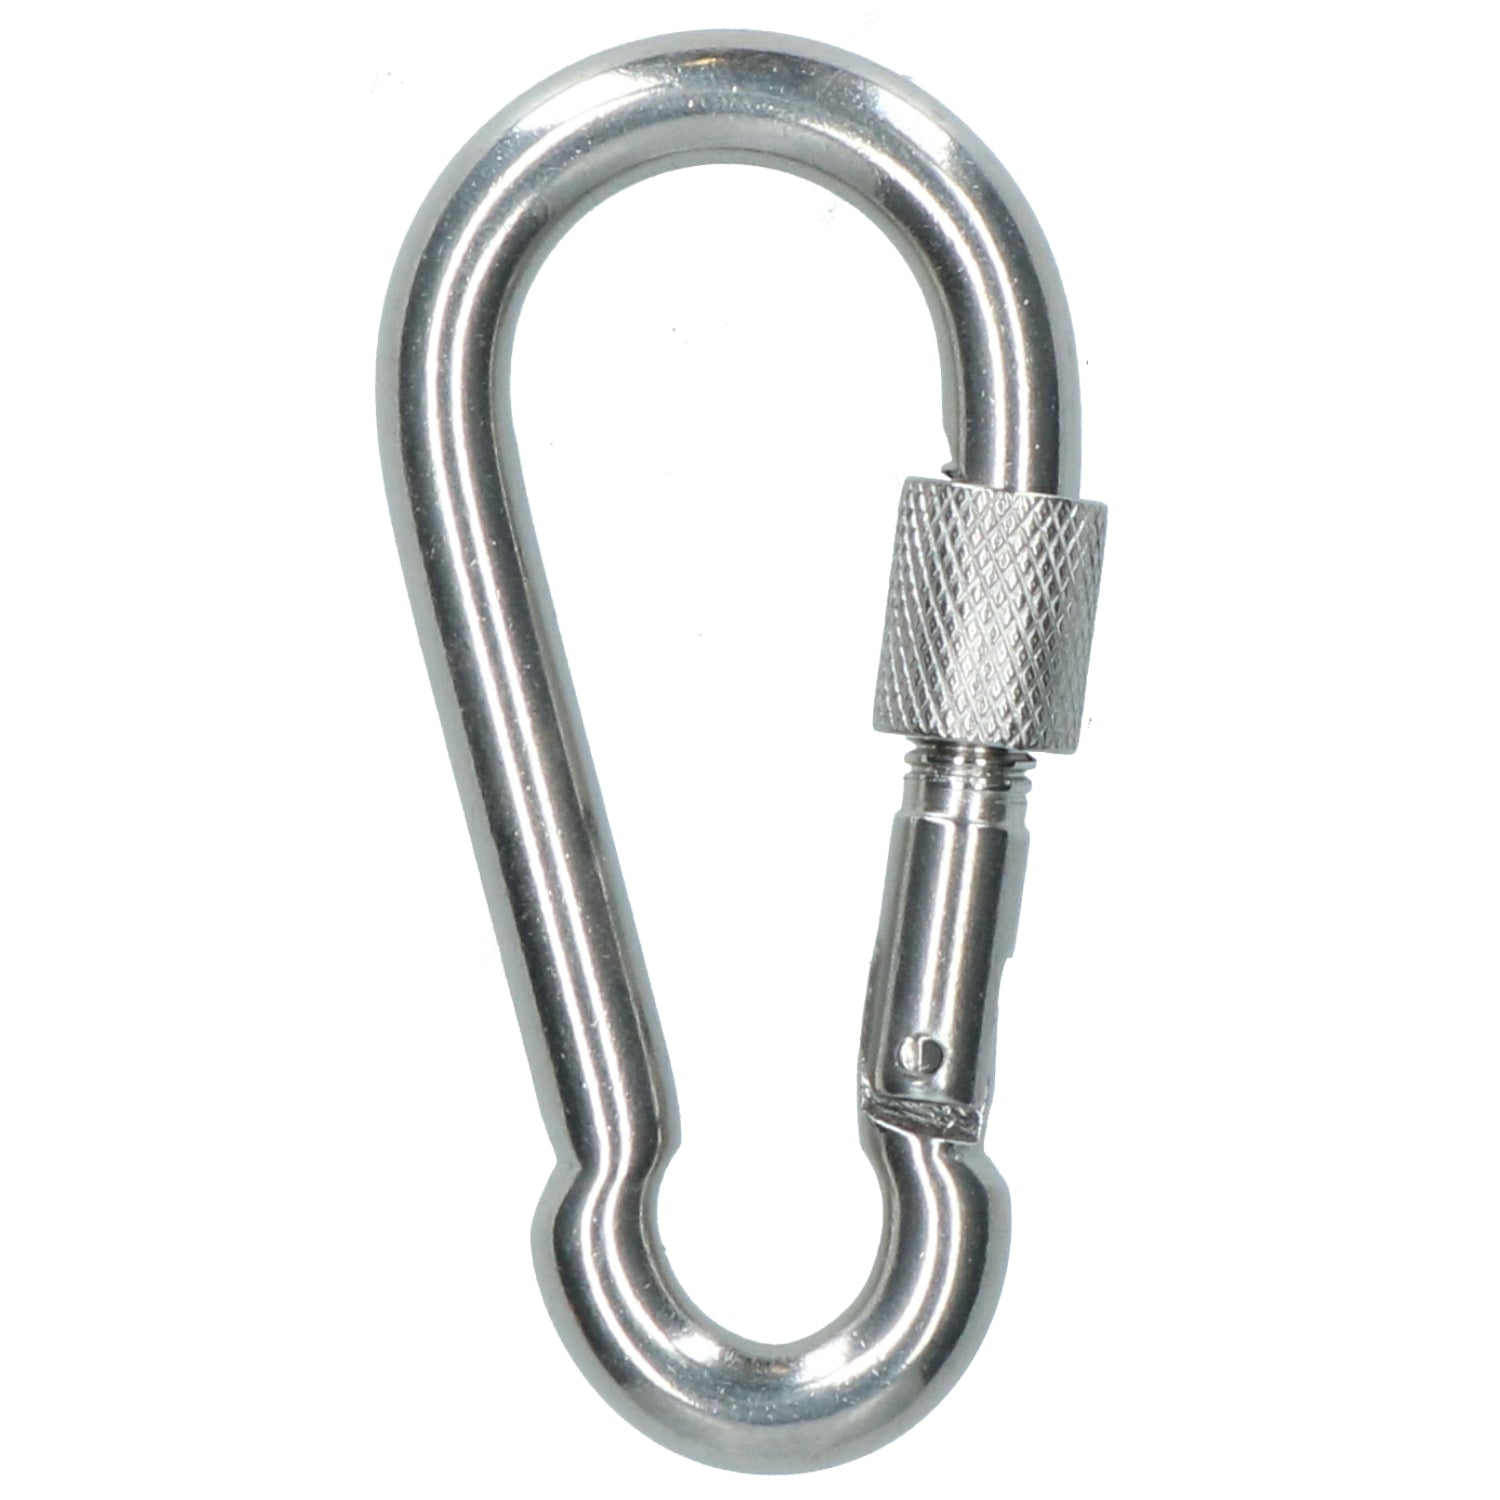 Carabiner Carbine Hook with Screw Gate 8mm MARINE GRADE Stainless Steel